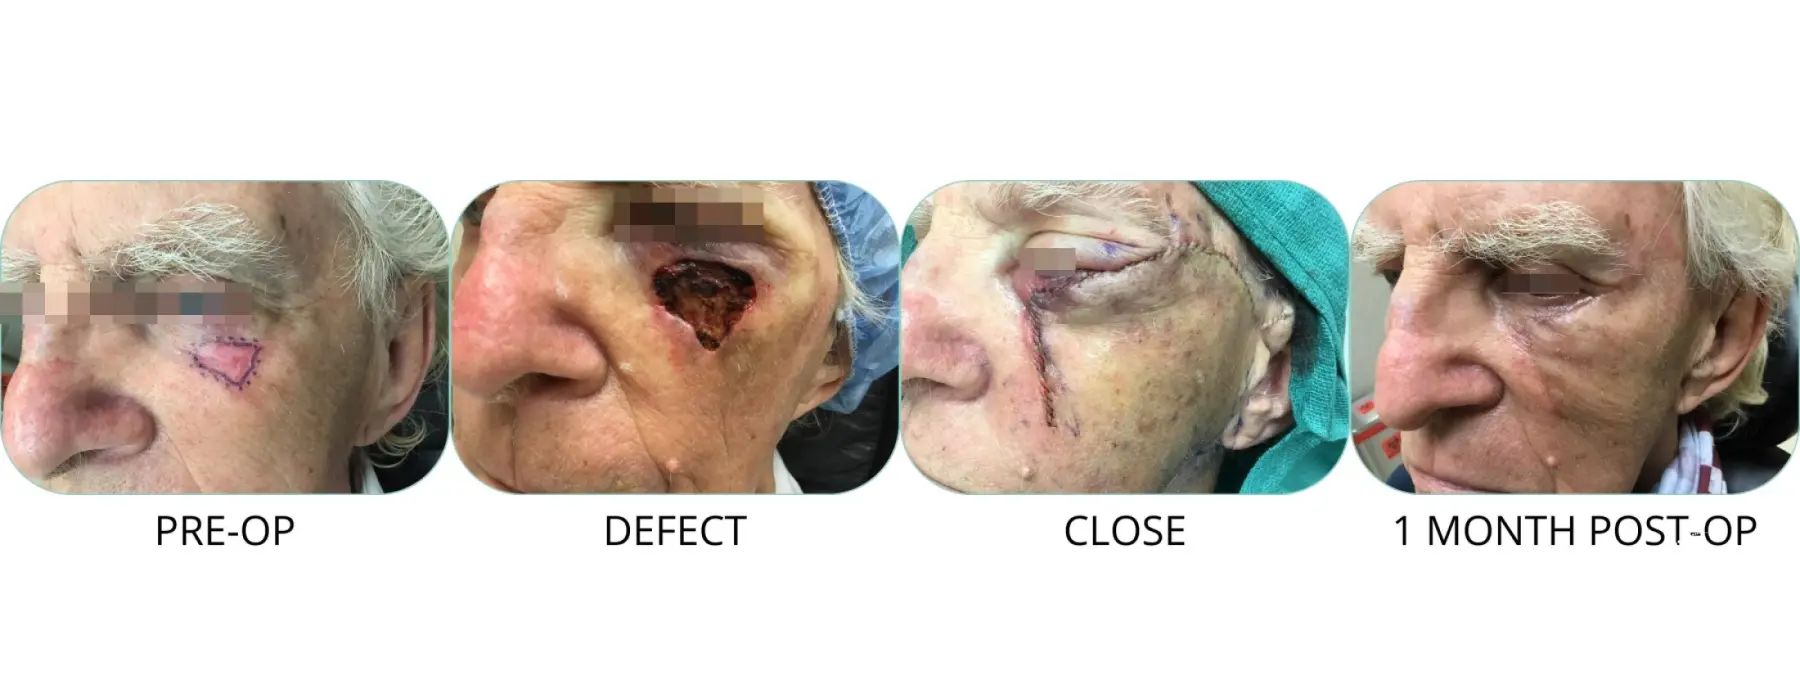 Basal Cell skin cancer under eye Mohs surgery - Before and After